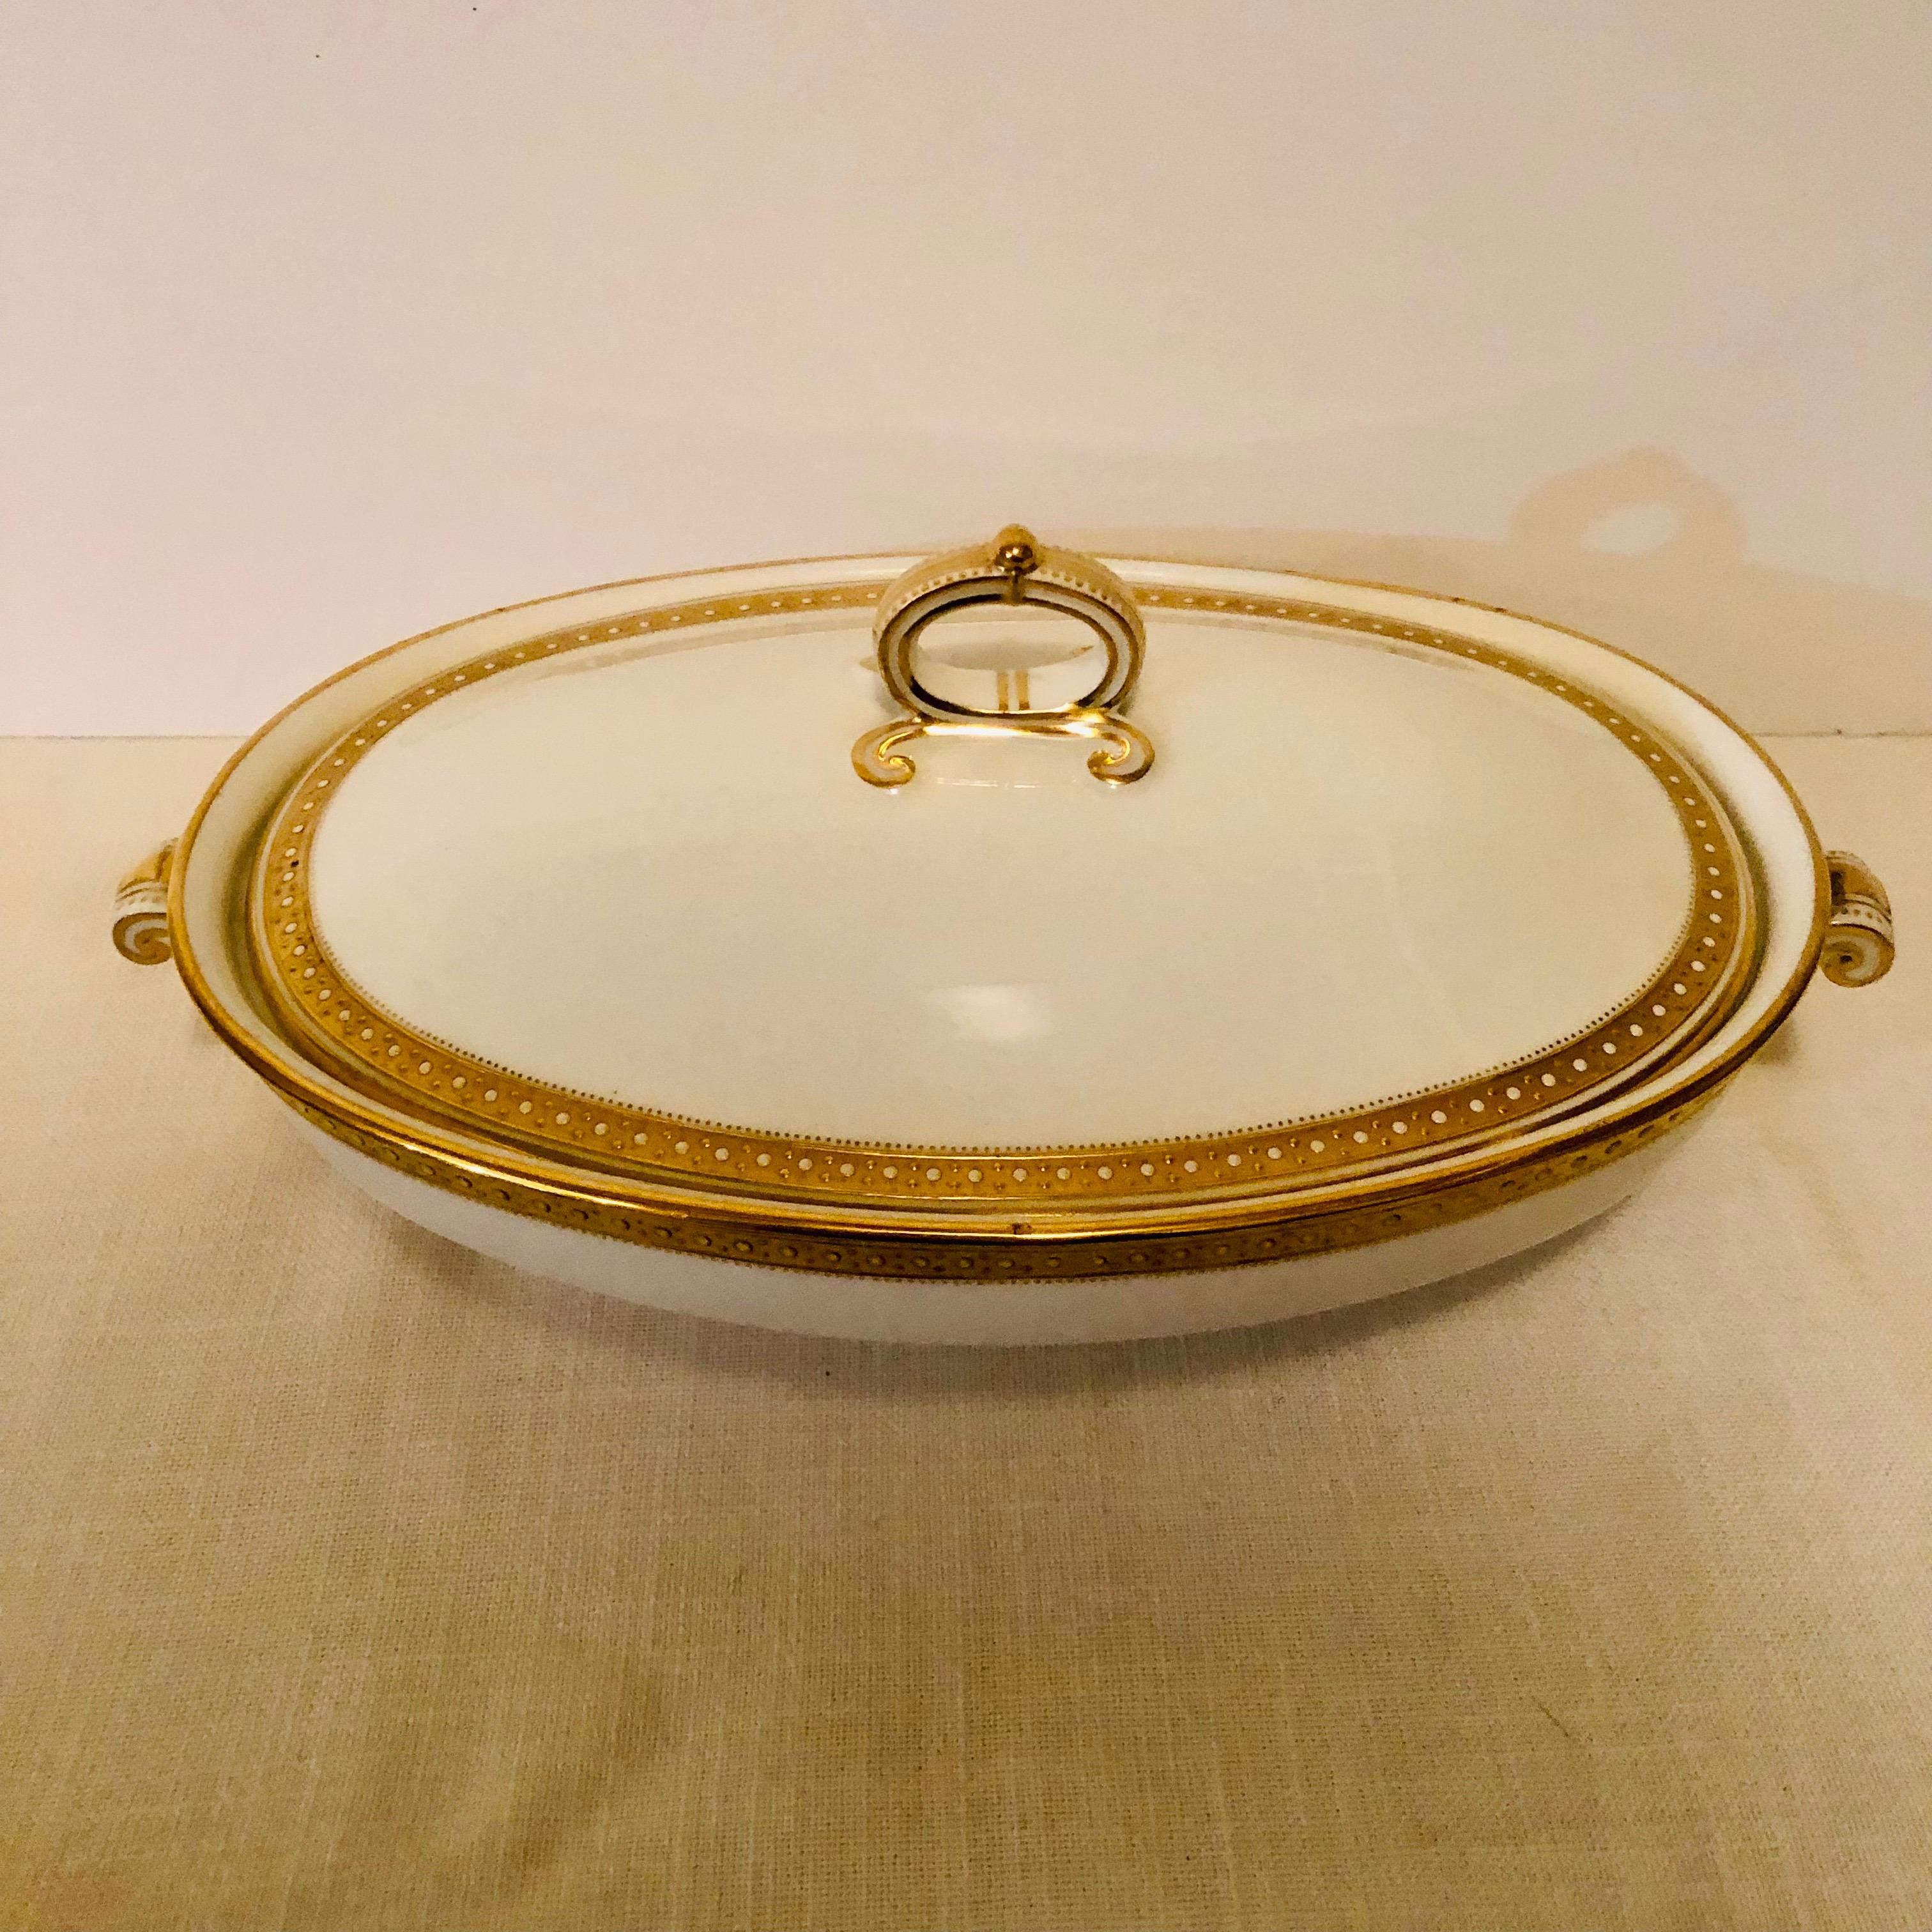 English Copeland Spode Covered Vegetable with Gold Border and Jeweling Made for T. Goode